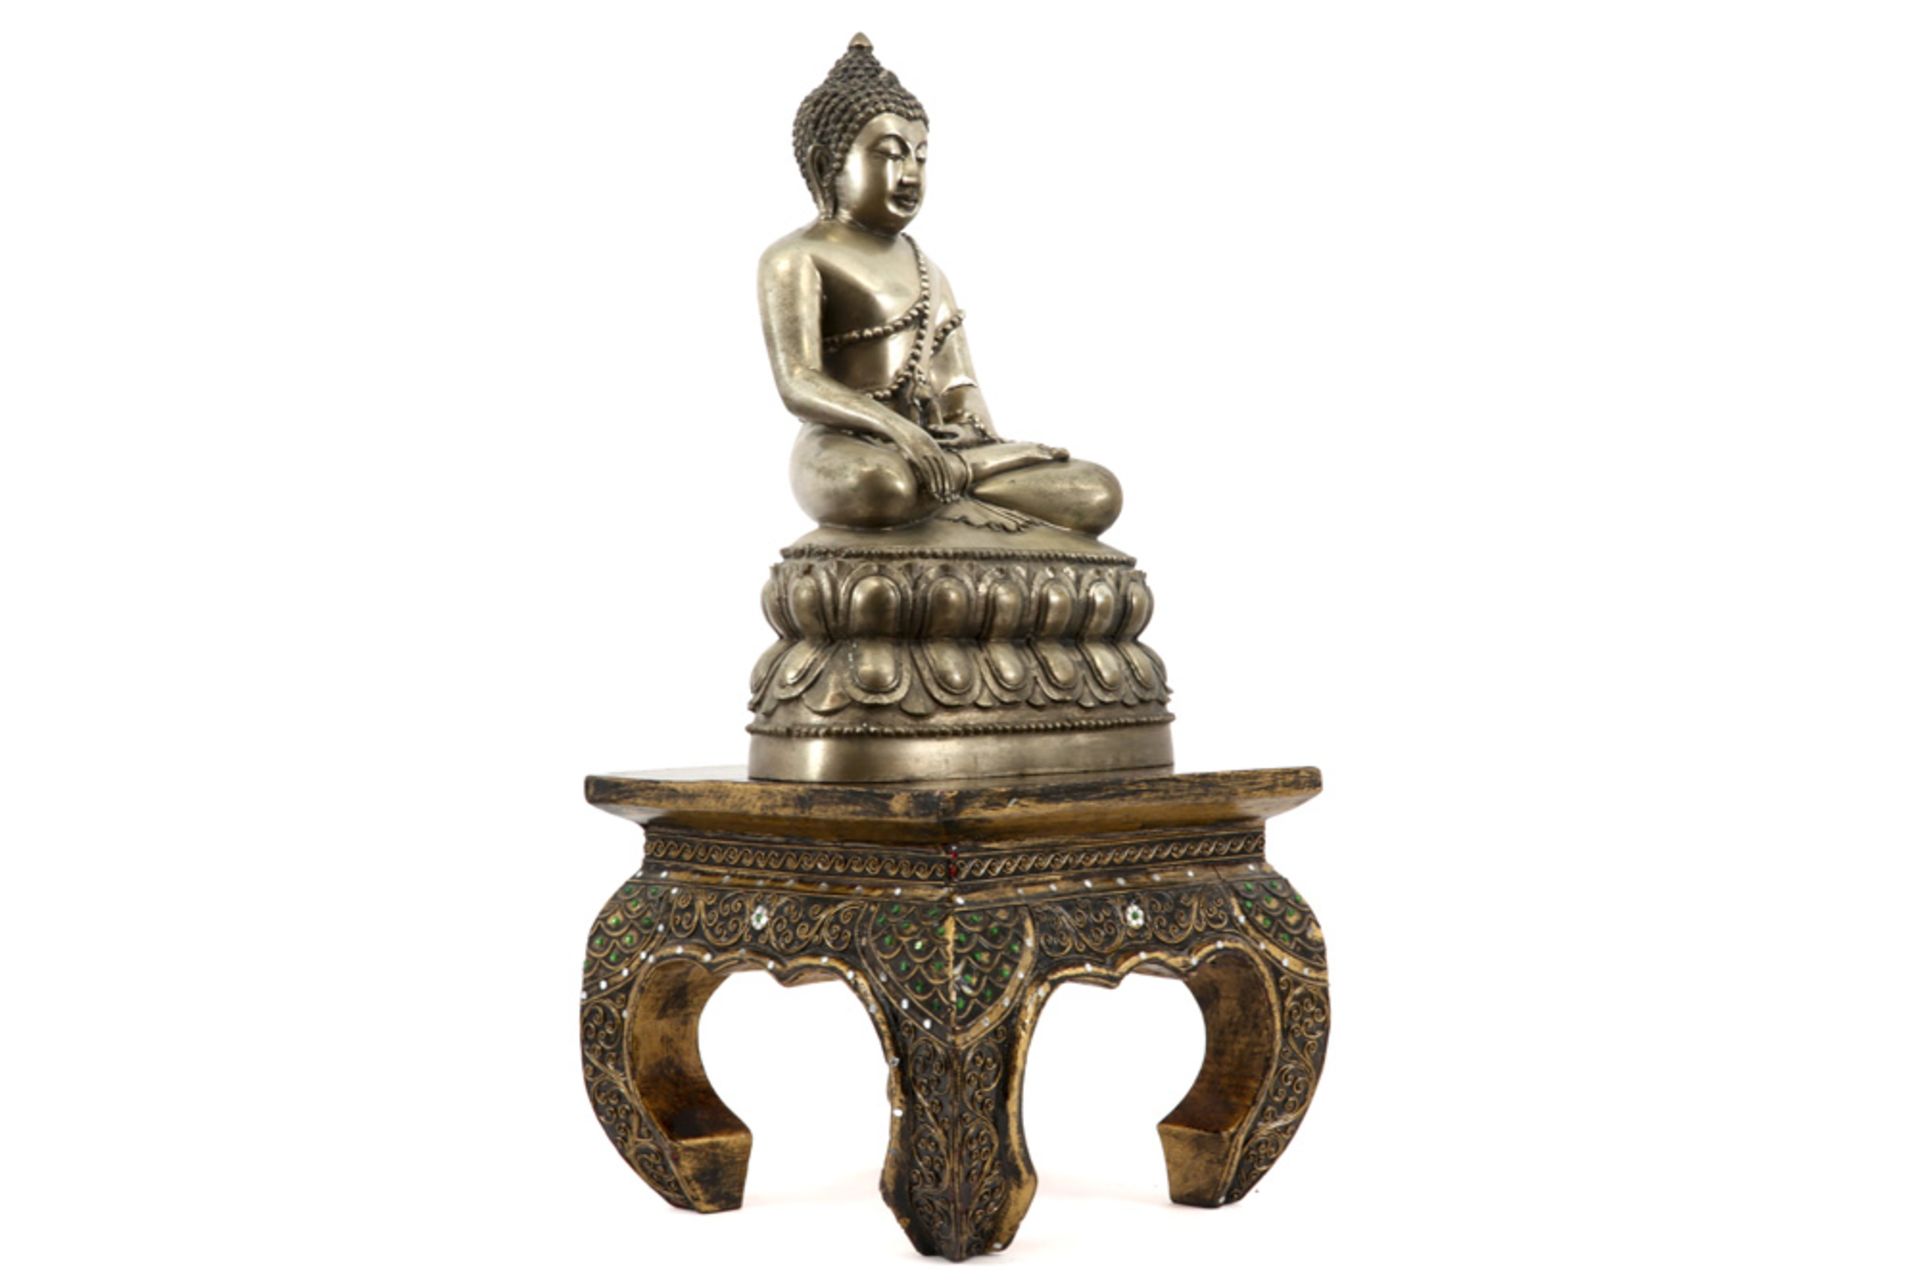 Burmese Shan style "Buddha" sculpture in silverplated bronze - on a gilded stand ||Birmaanse - Image 2 of 6